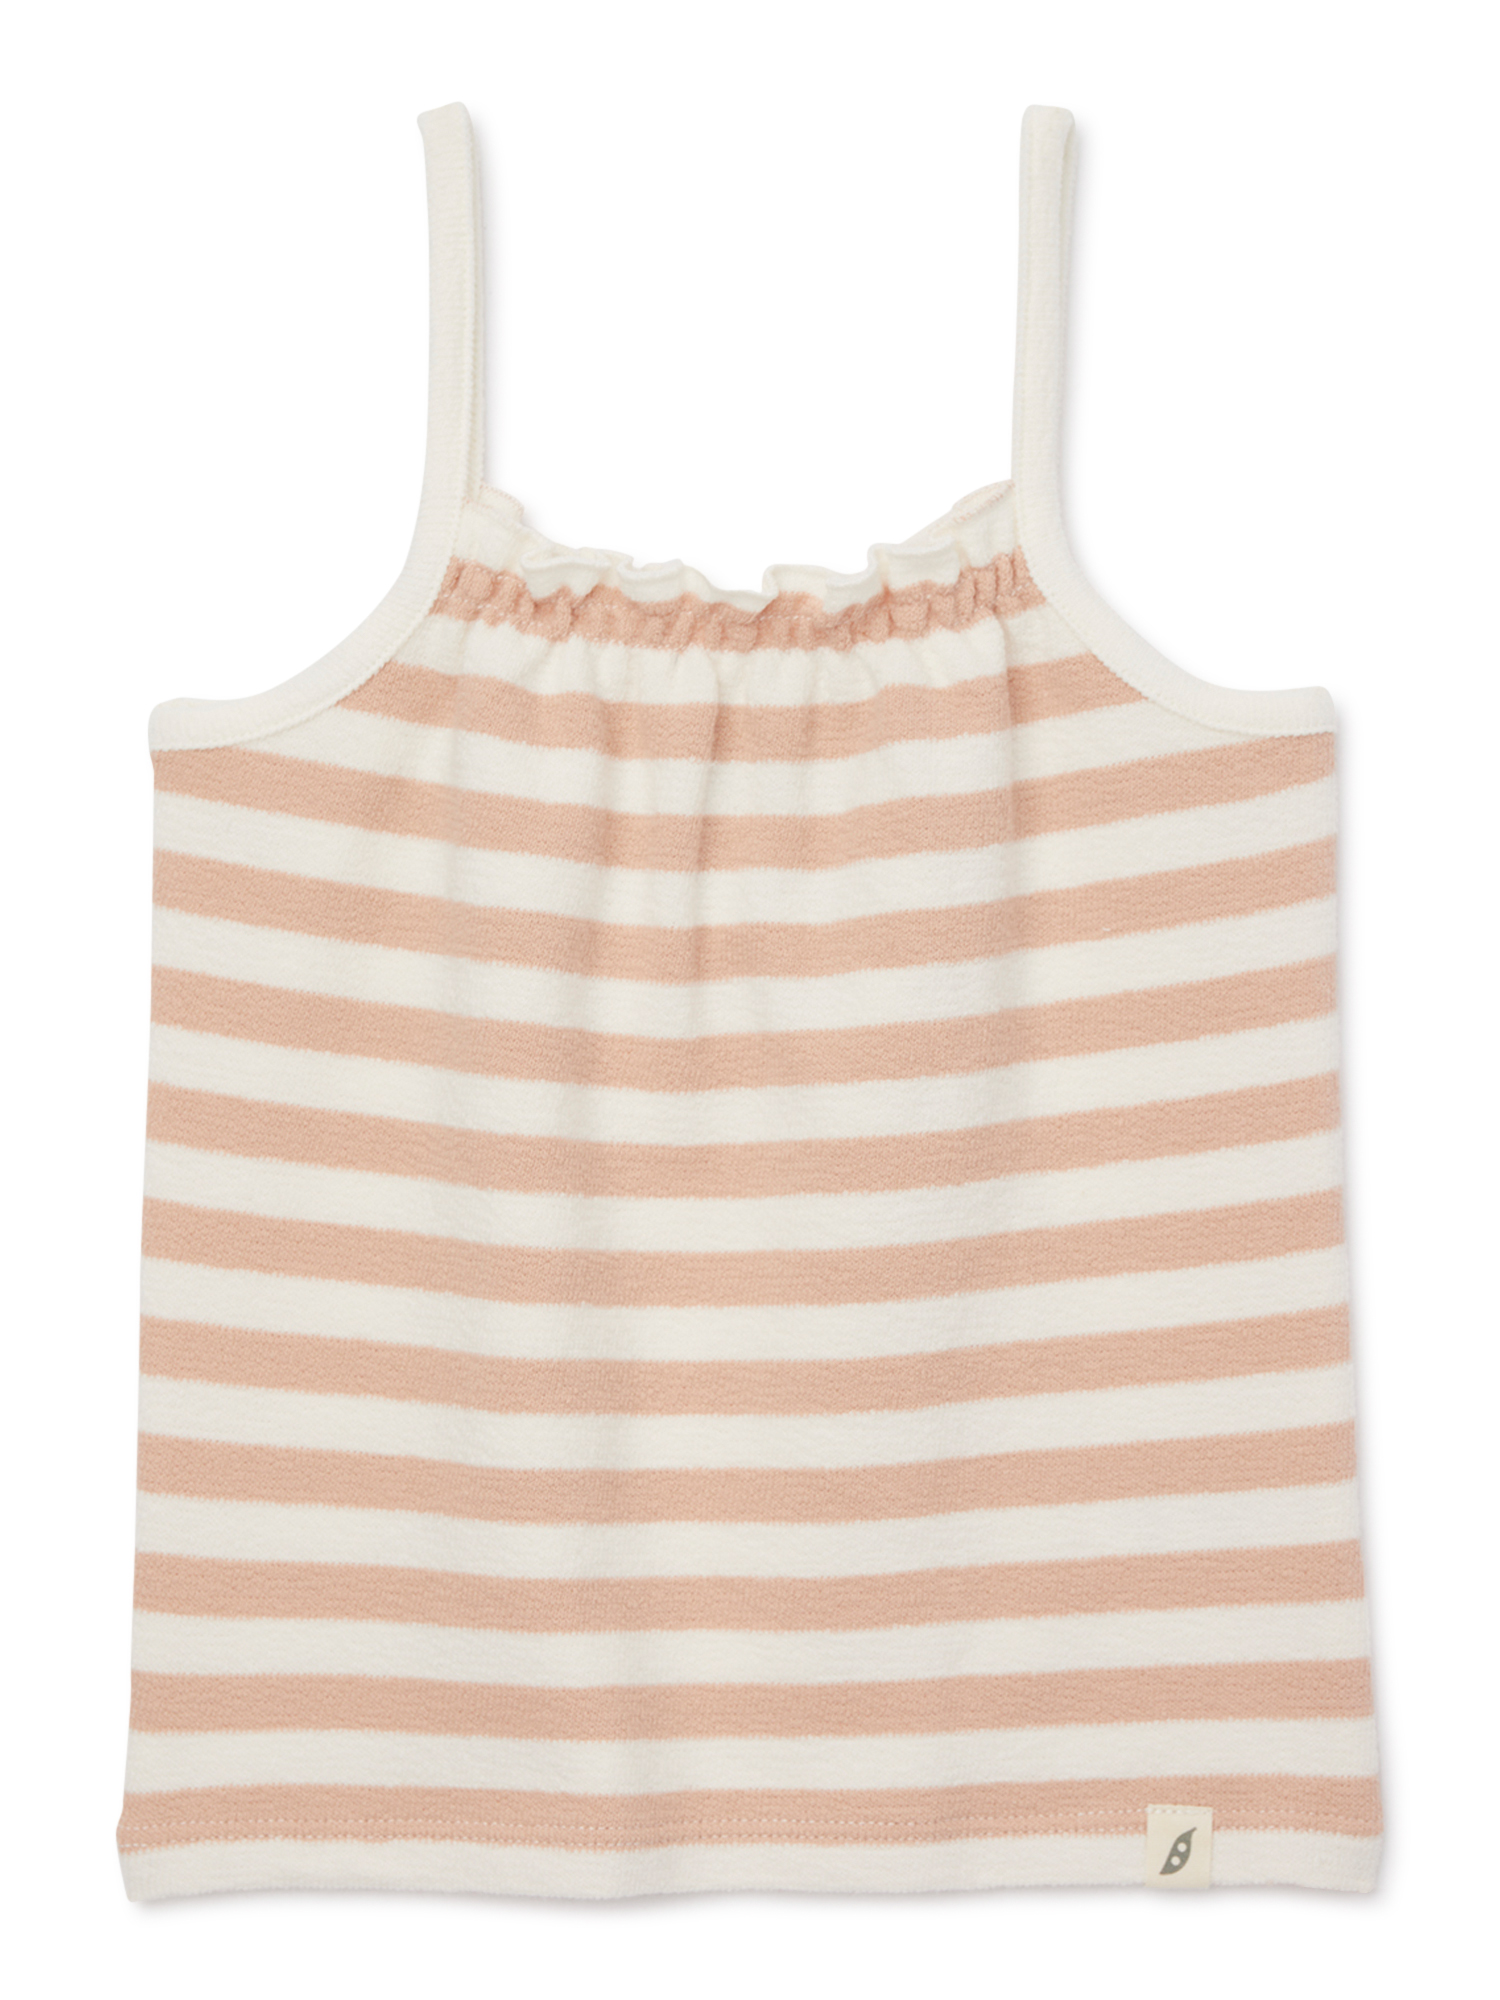 easy-peasy Toddler Girls Strappy Tank Top, Sizes 12M-5T - image 1 of 4